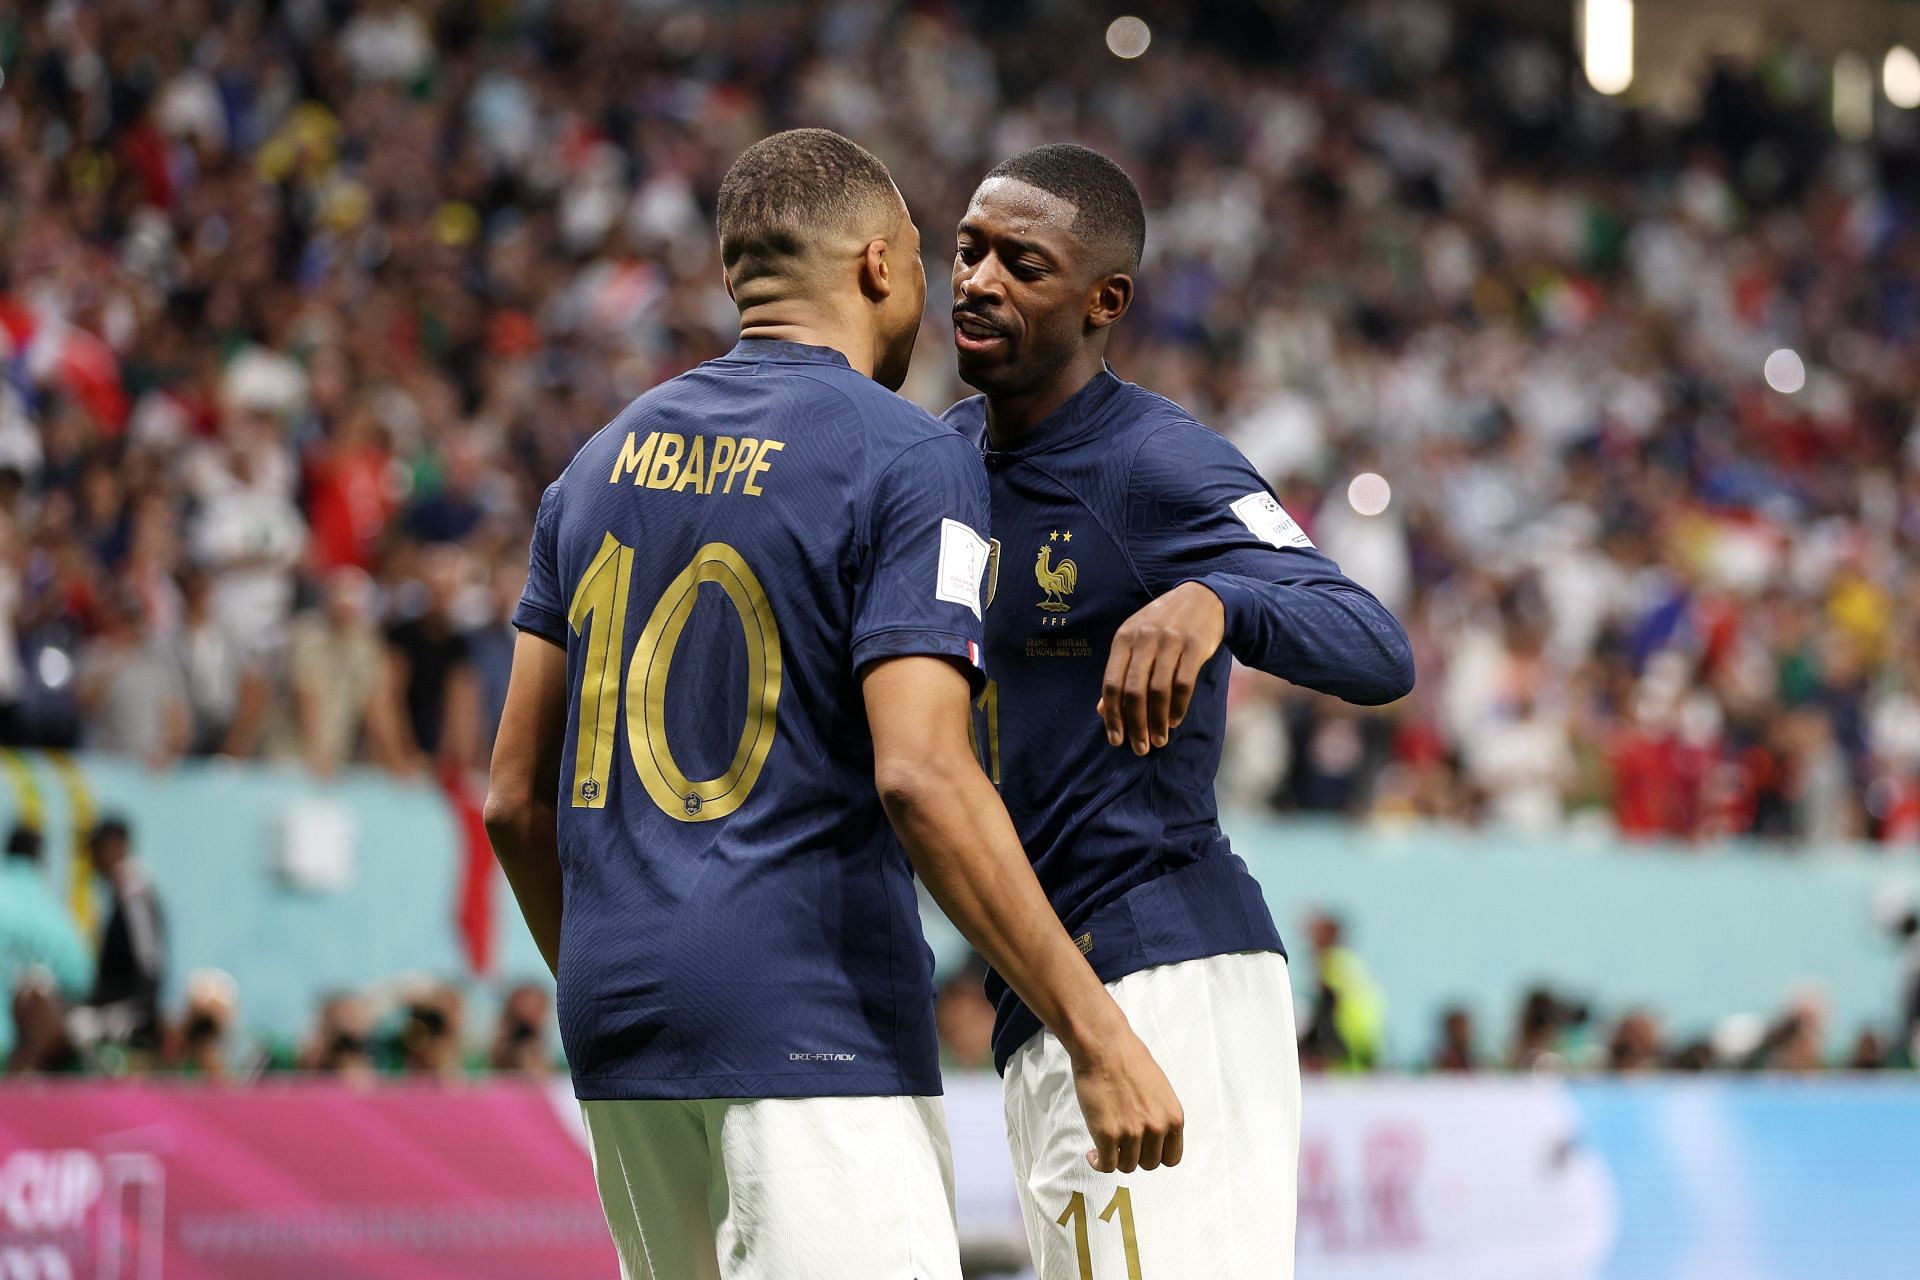 Mbappe branded Dembele as the best young player in the world.